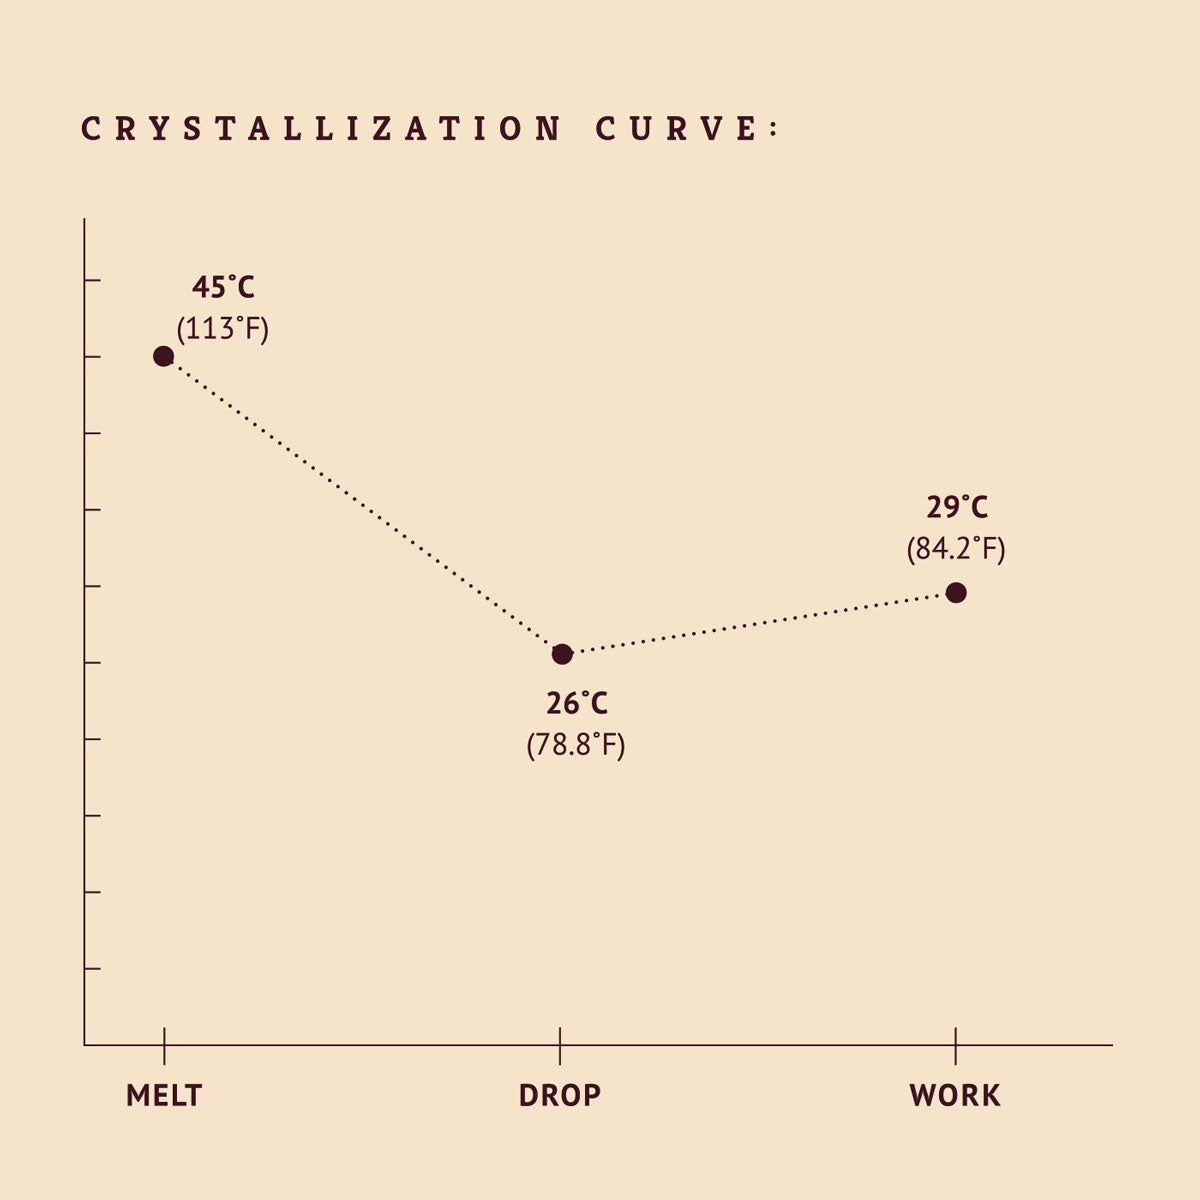 White chocolate crystallization curve tempering